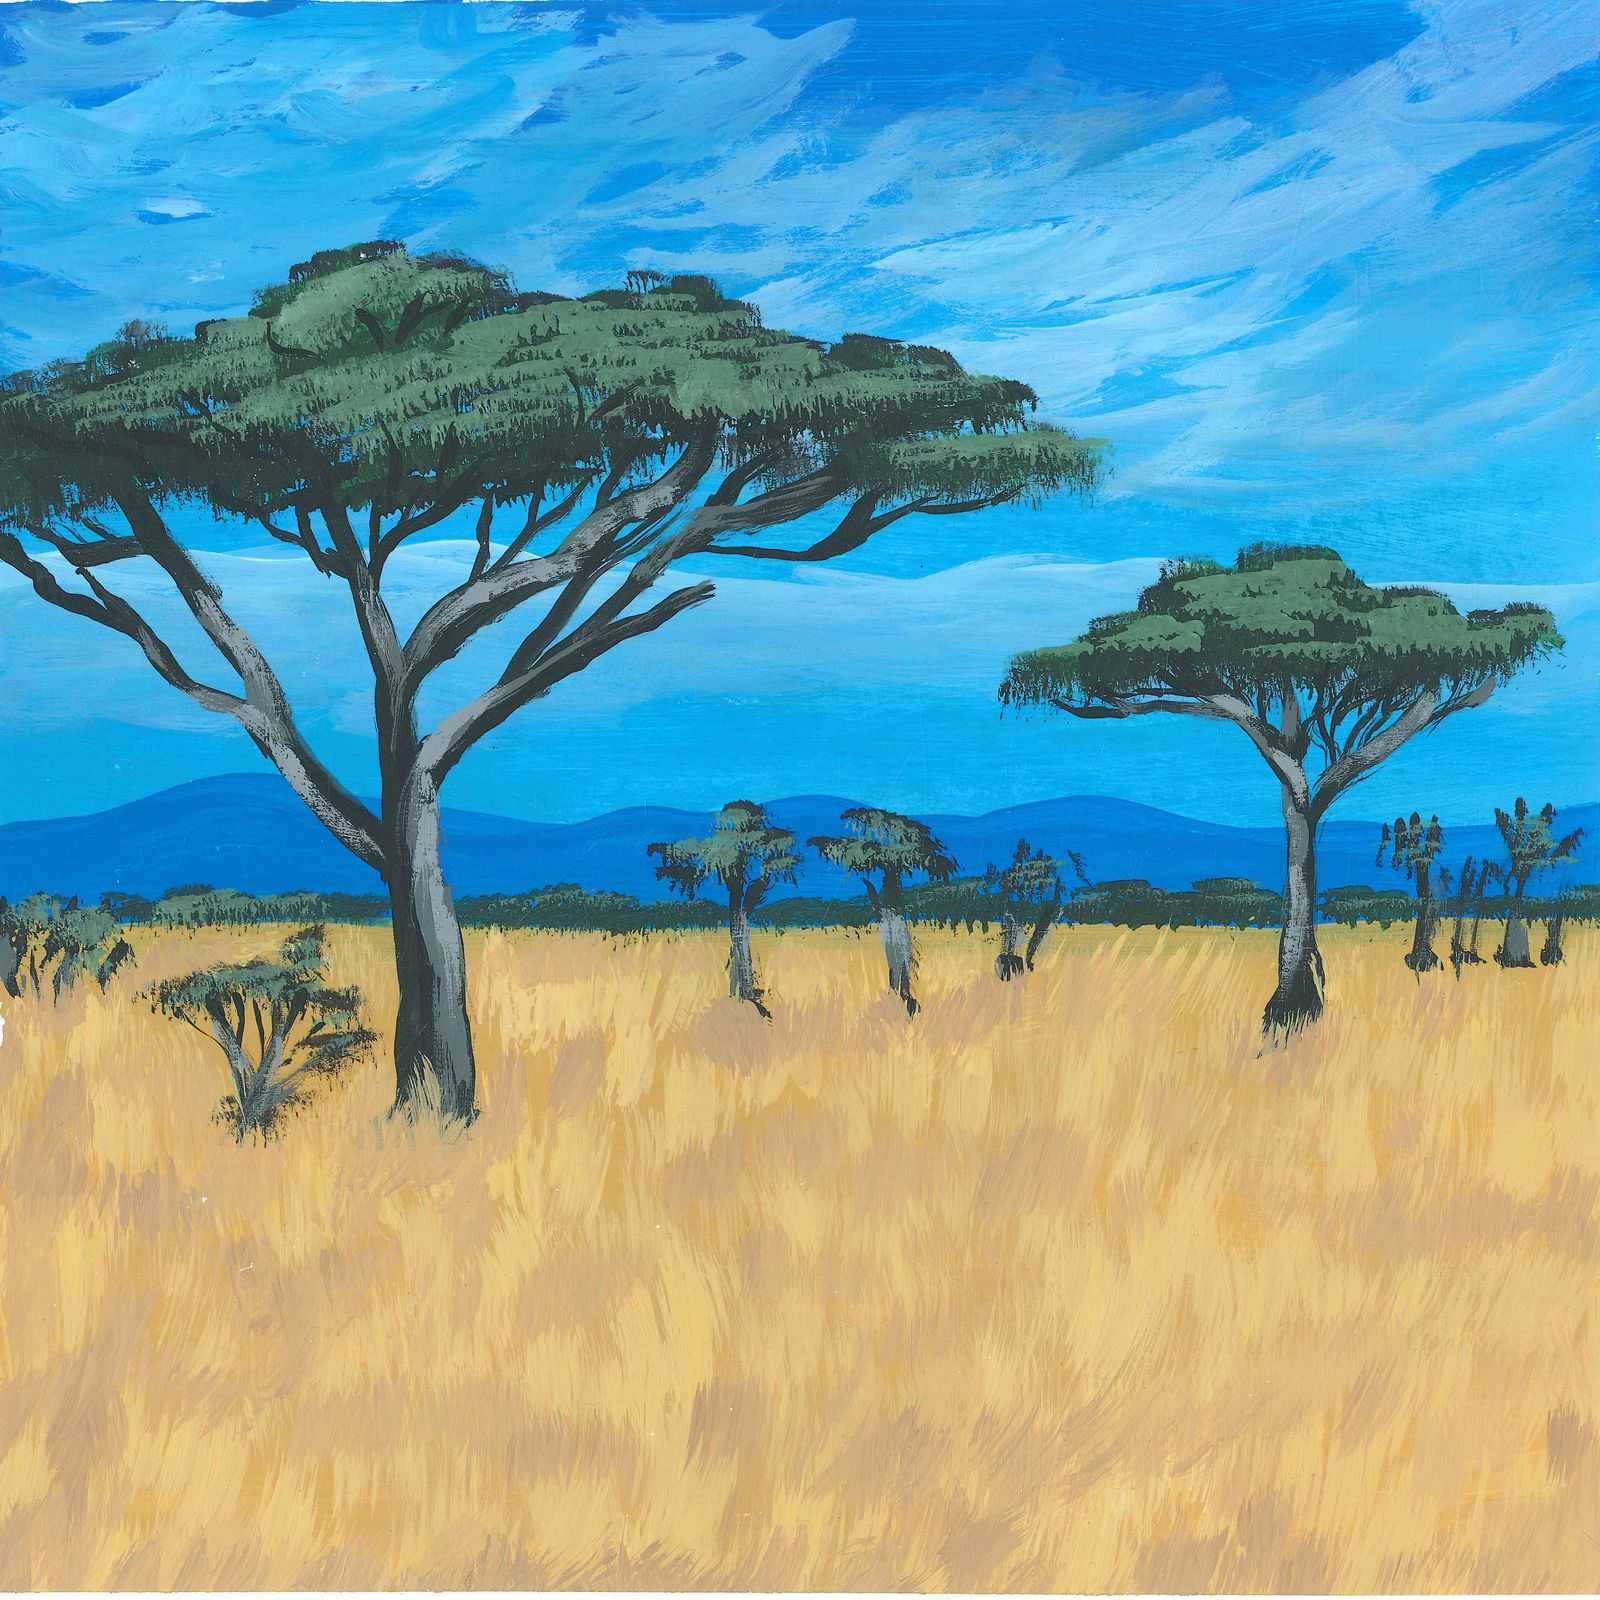 An African Night - nature landscape painting - earth.fm